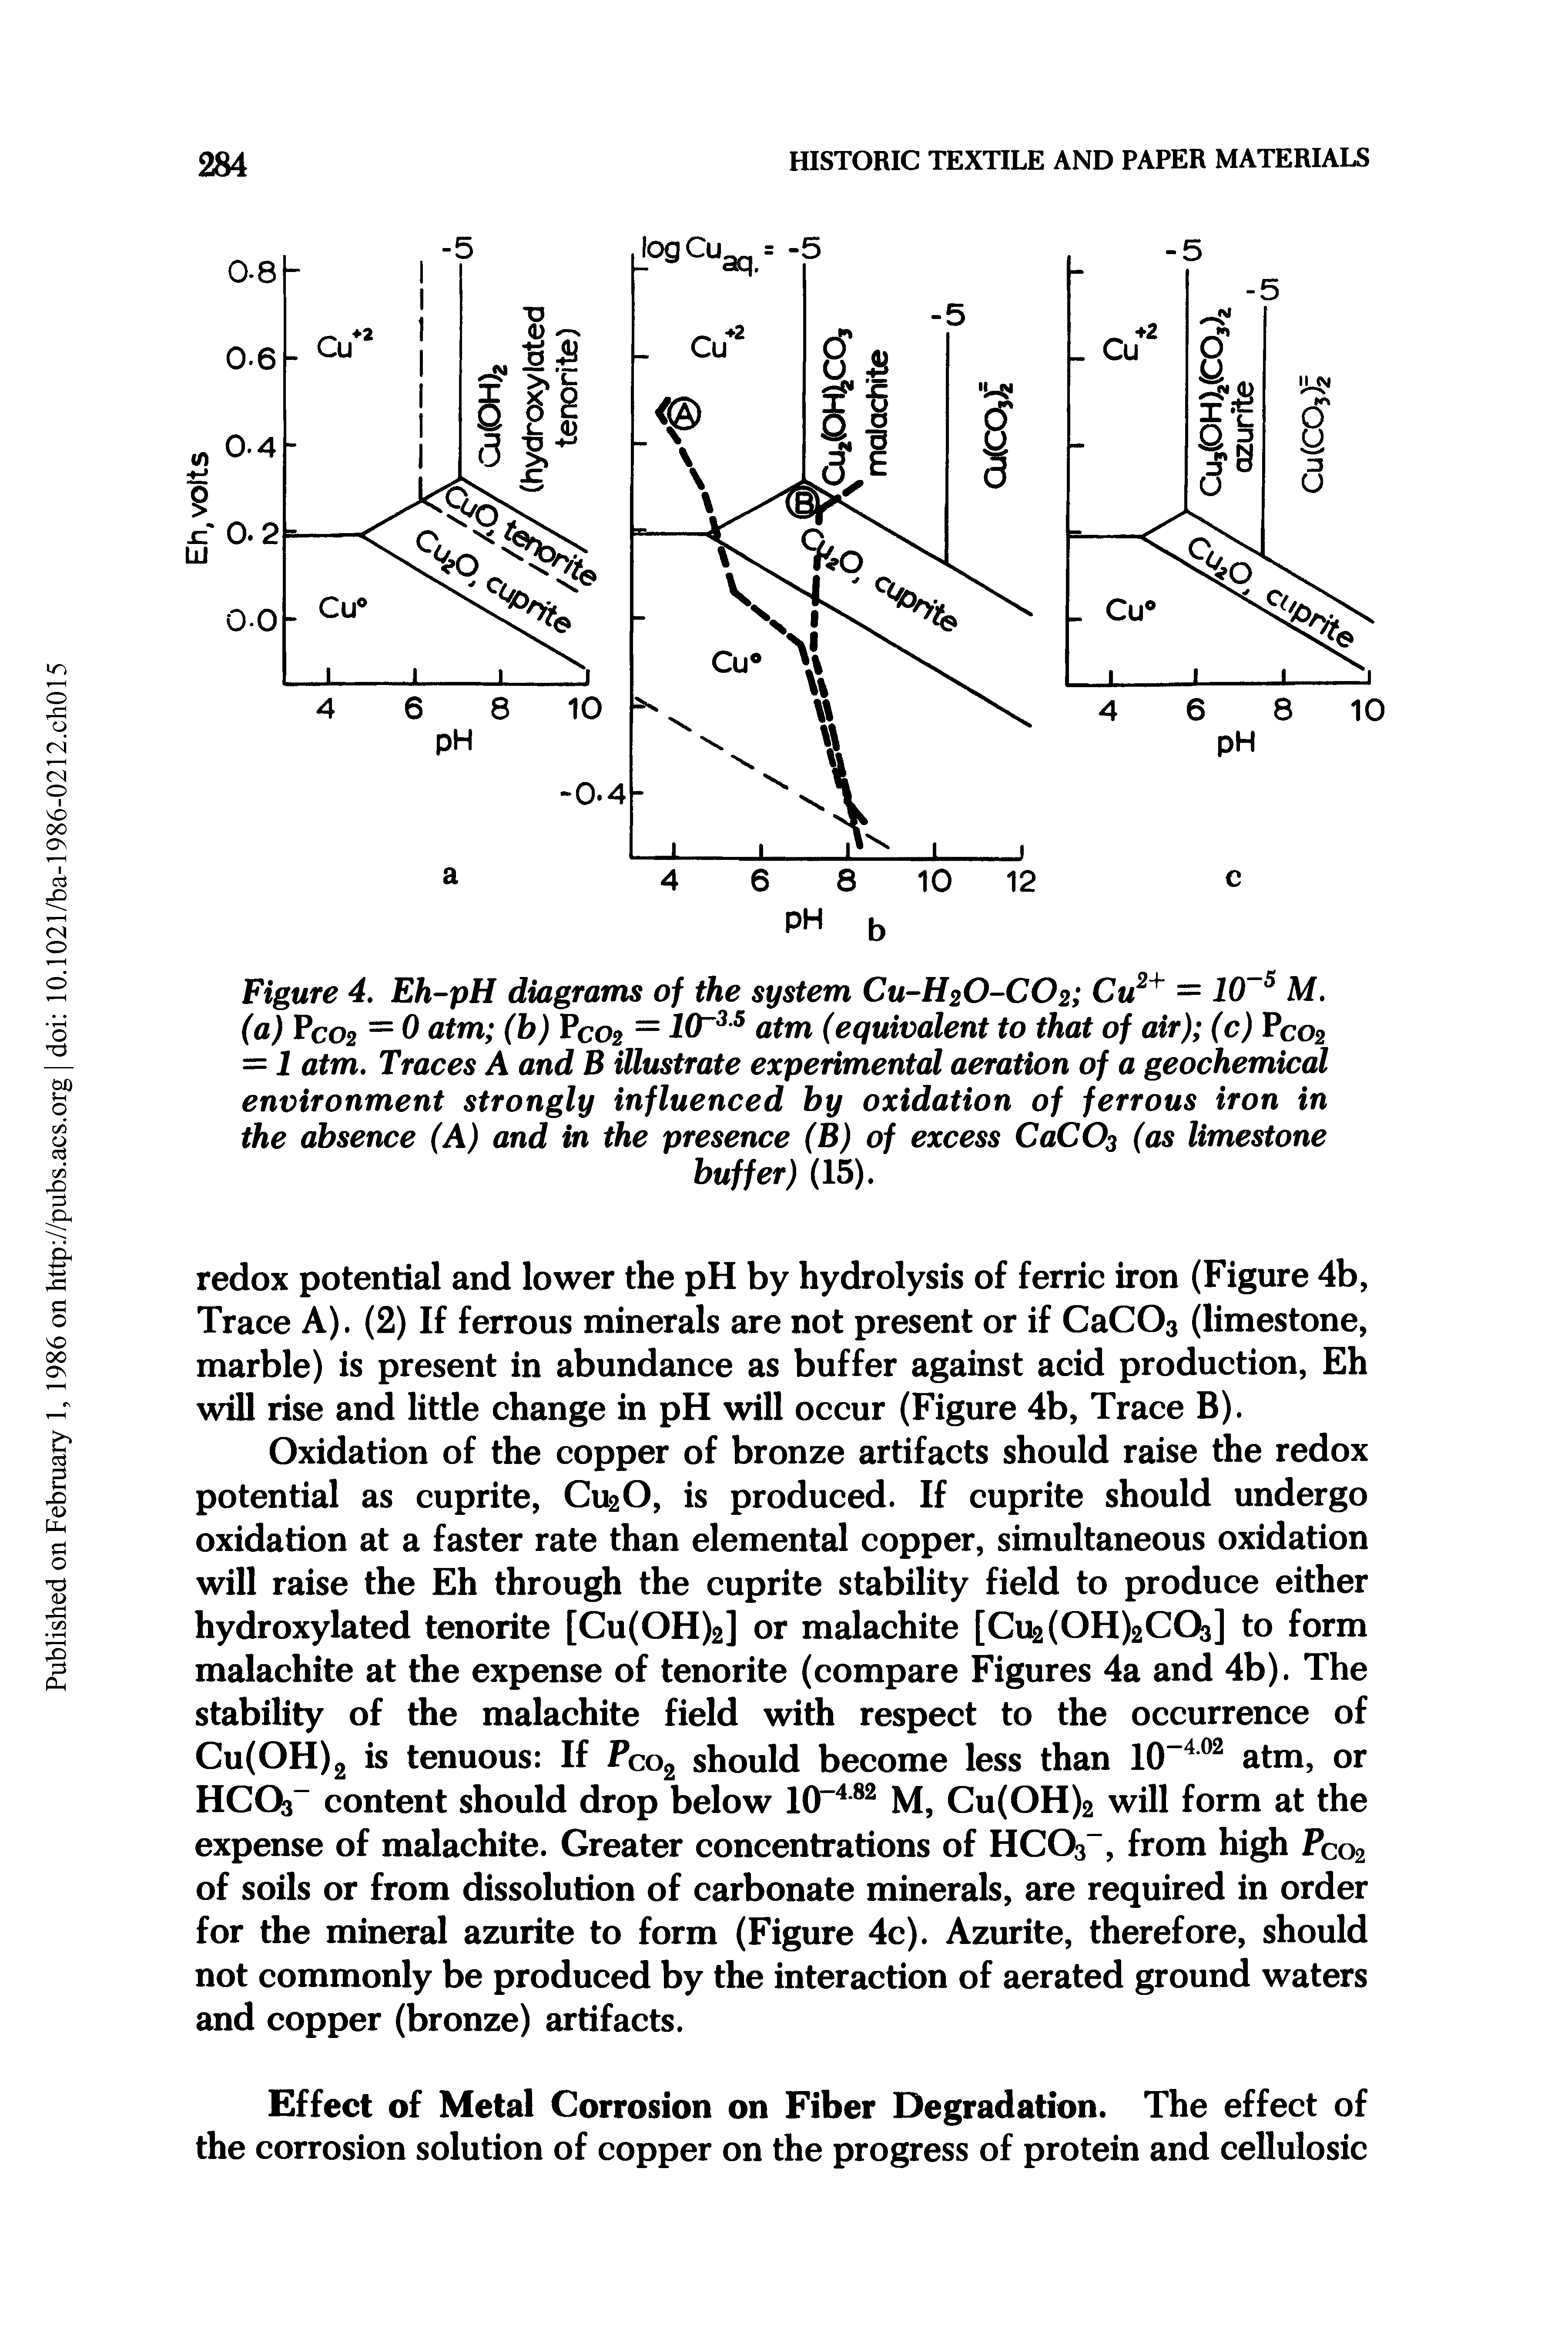 Figure 4. Eh-pH diagrams of the system CU-H2O-CO2 Cu2+ = 10 5 M. (a) PC02 = 0 atm (b) PC02 = 10 3 5 atm (equivalent to that of air) (c) Pco2 = 1 atm. Traces A and B illustrate experimental aeration of a geochemical environment strongly influenced by oxidation of ferrous iron in the absence (A) and in the presence (B) of excess CaCO (as limestone...